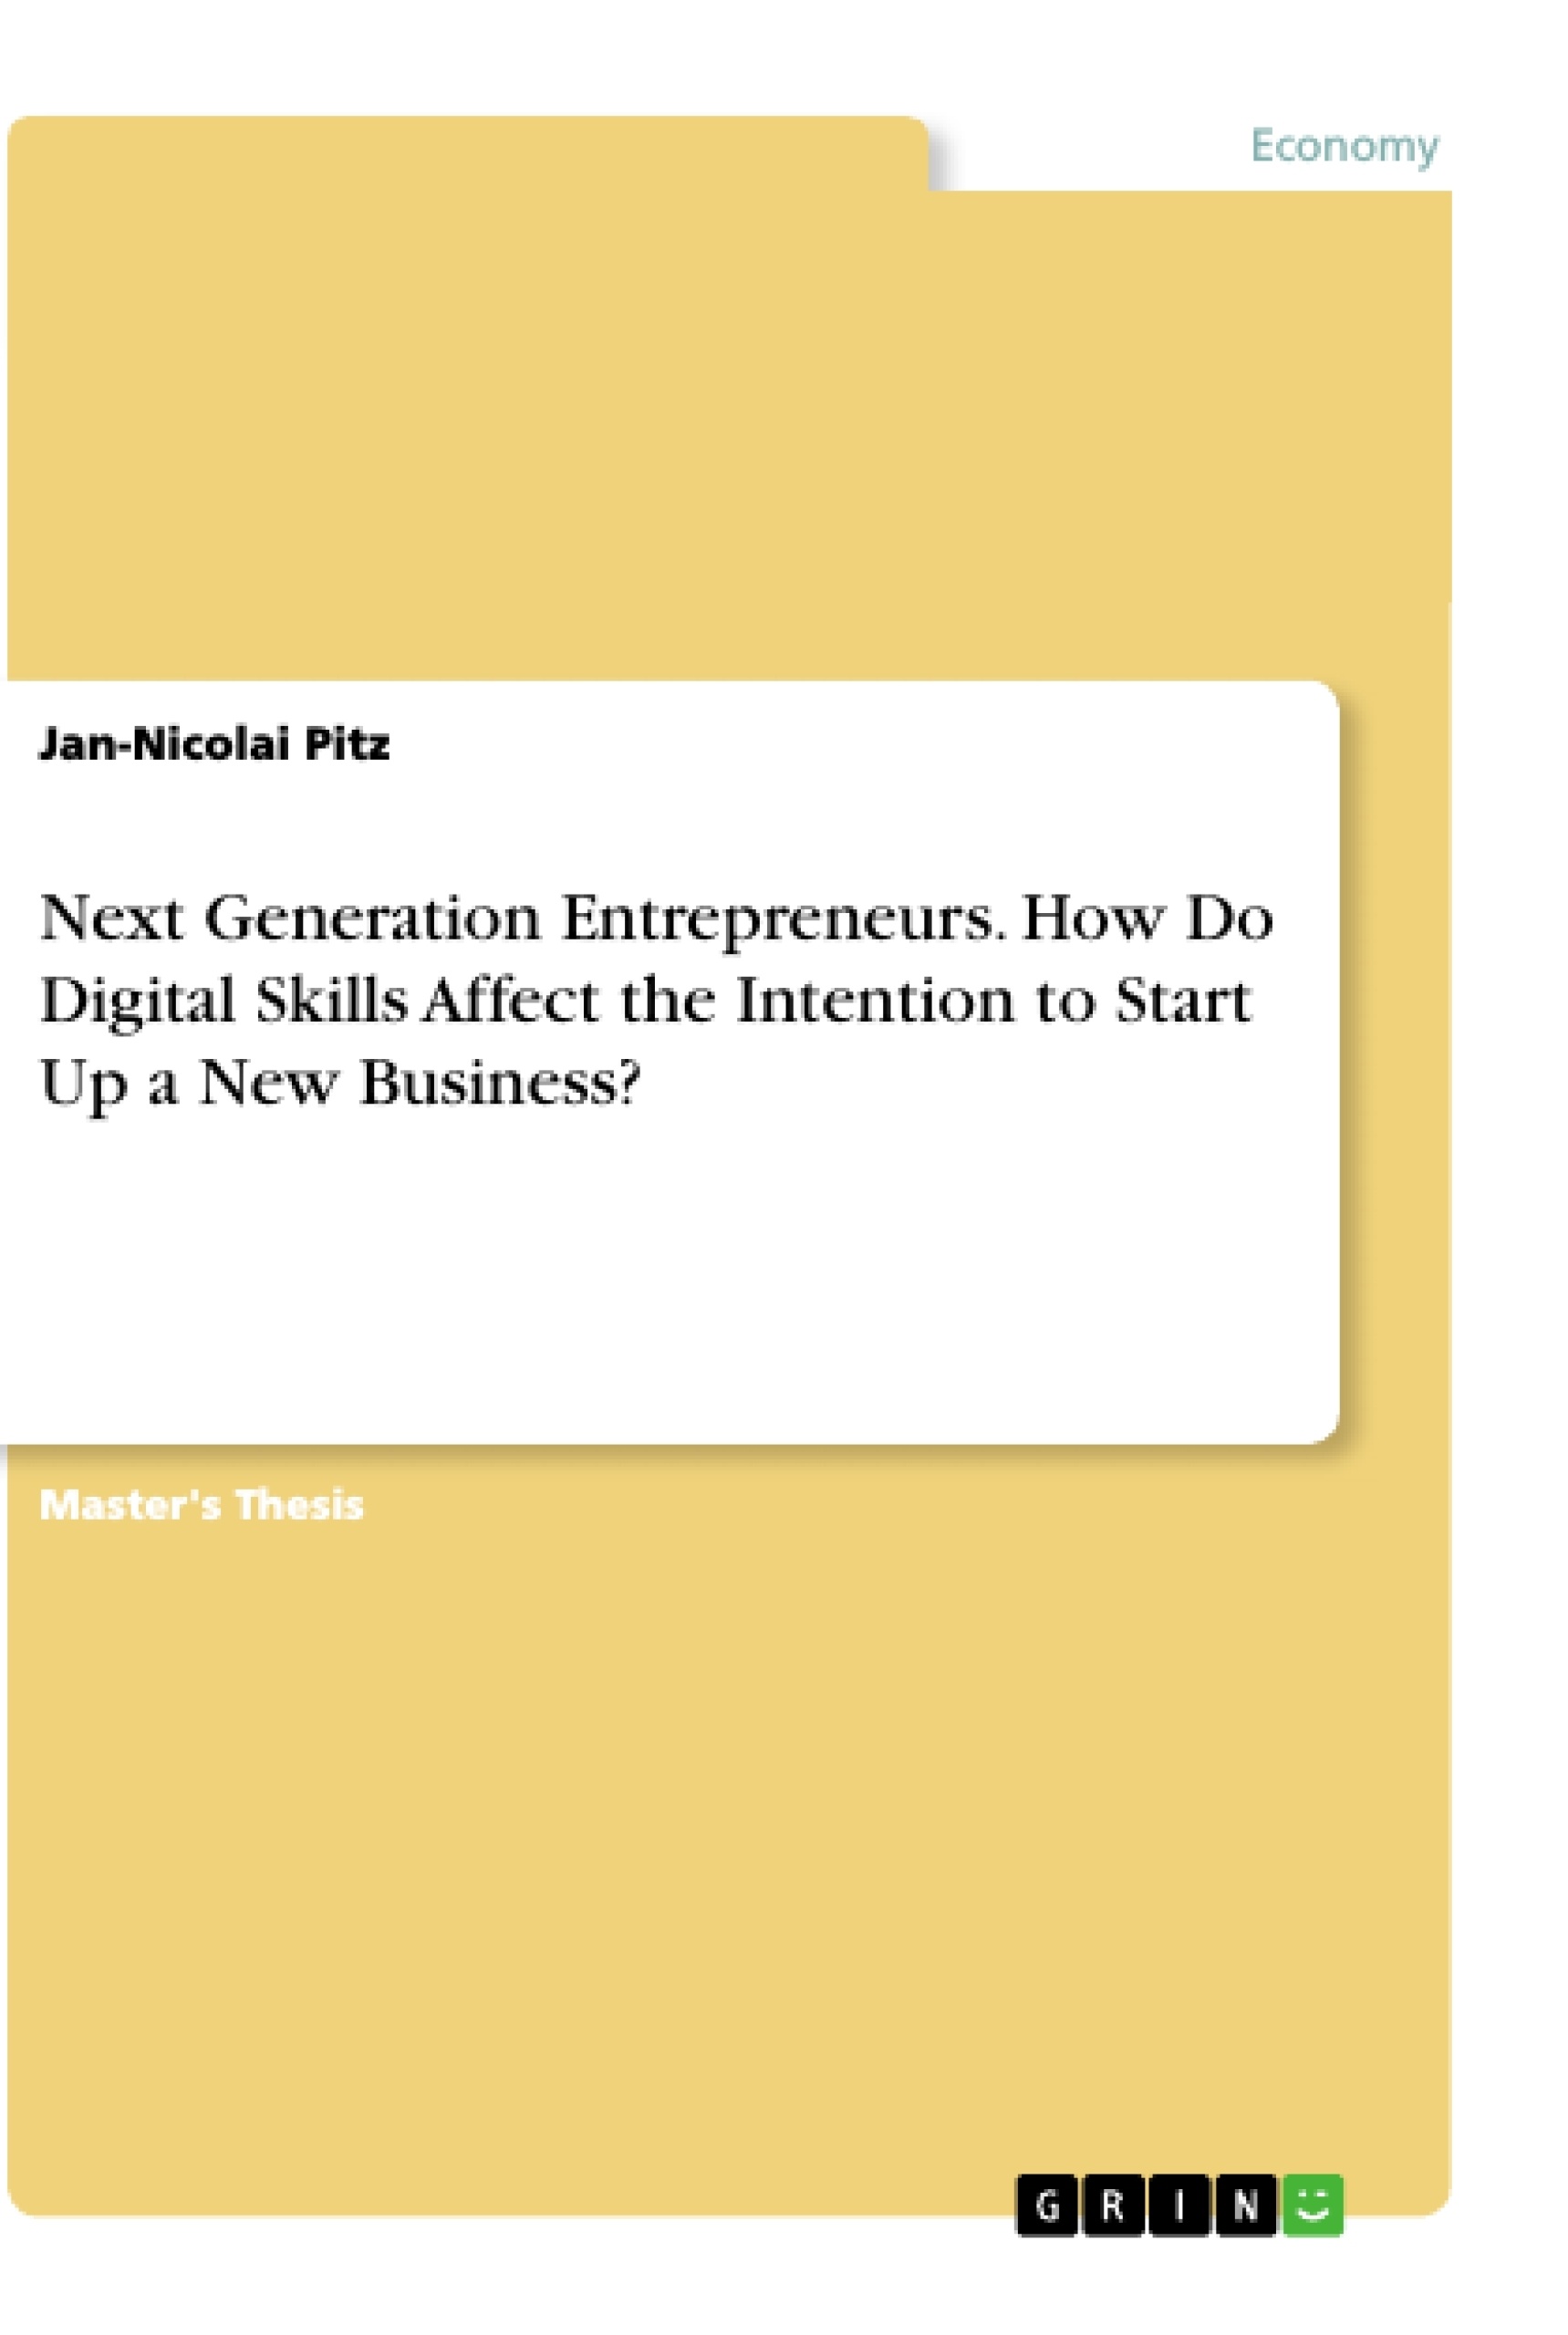 Titre: Next Generation Entrepreneurs. How Do Digital Skills Affect the Intention to Start Up a New Business?